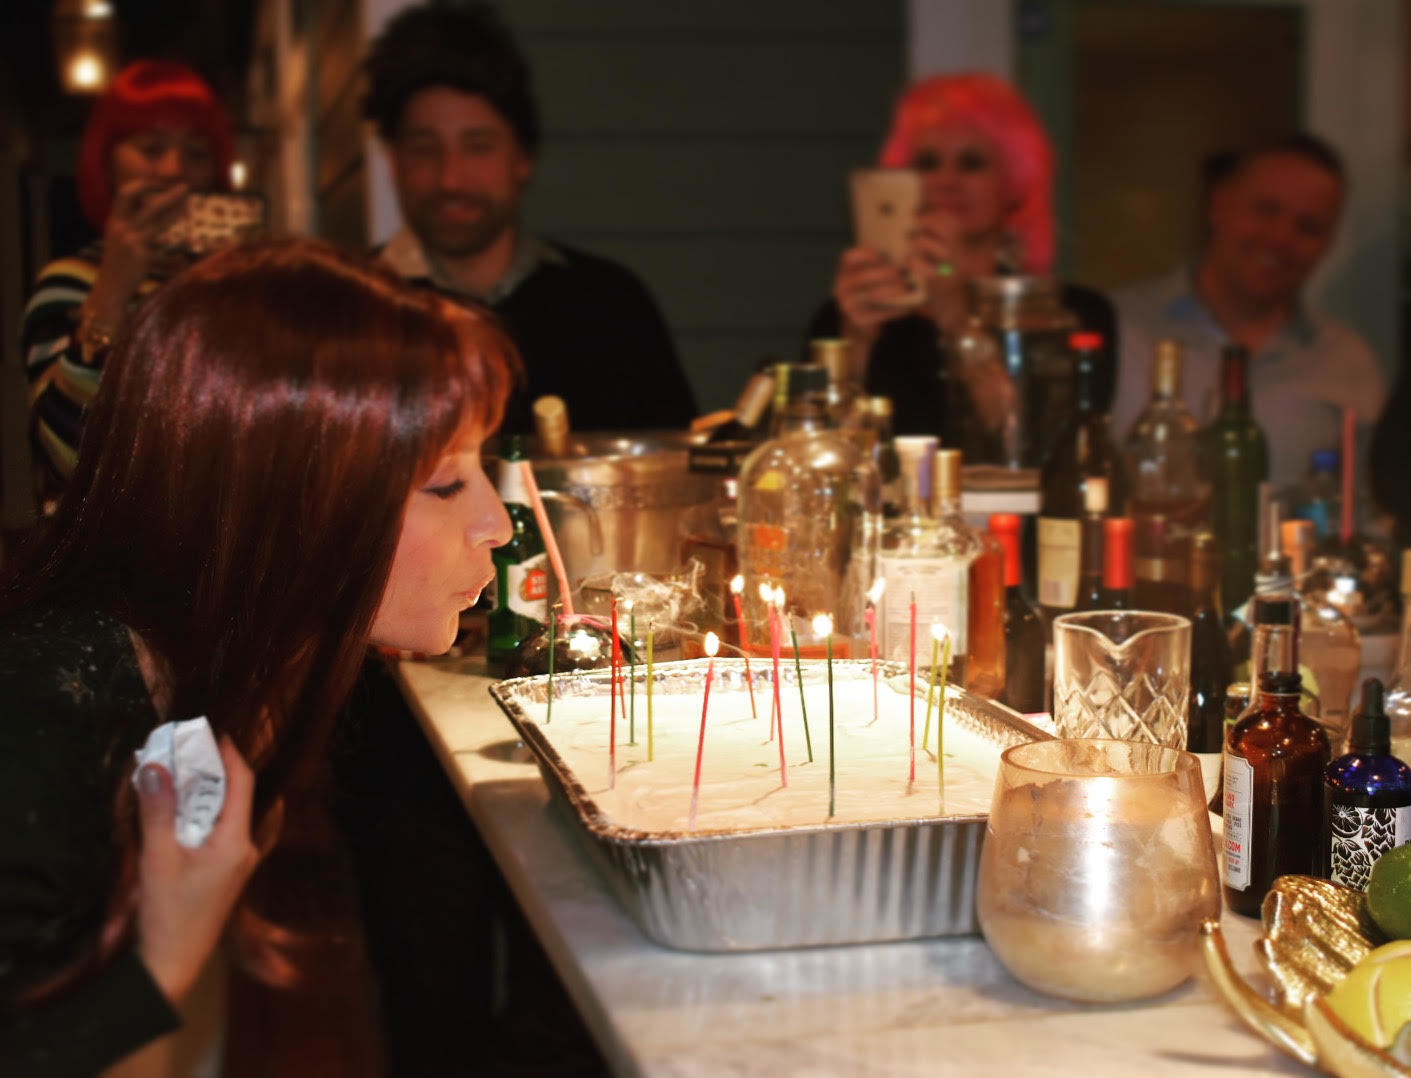 Emily Stroud blows out the candles at her 30th birthday party Dec. 30. Photo courtesy of Kelsey Alholm